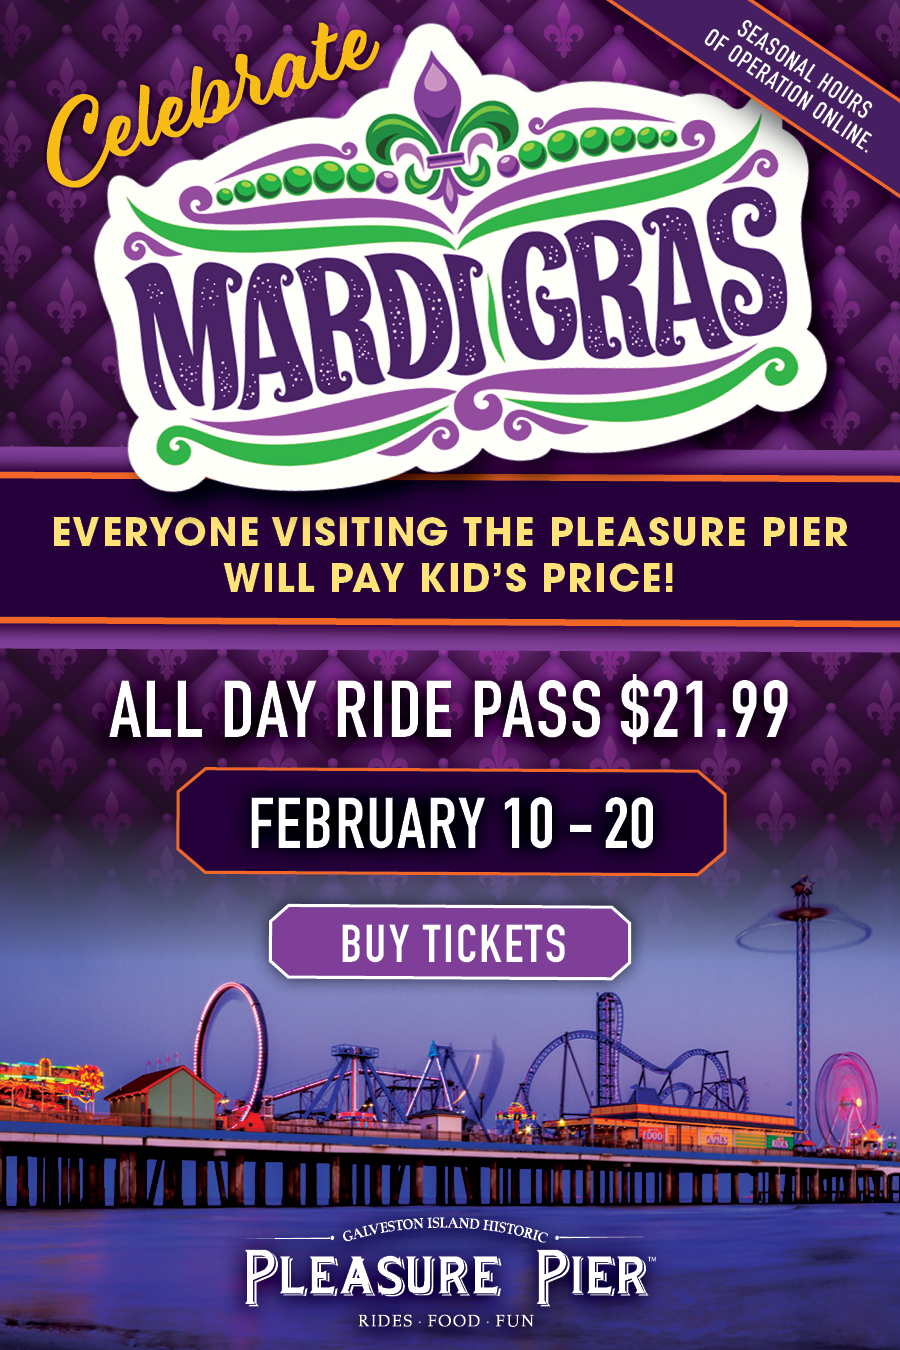 Mardi Gras Special! February 19nd - February 27rd